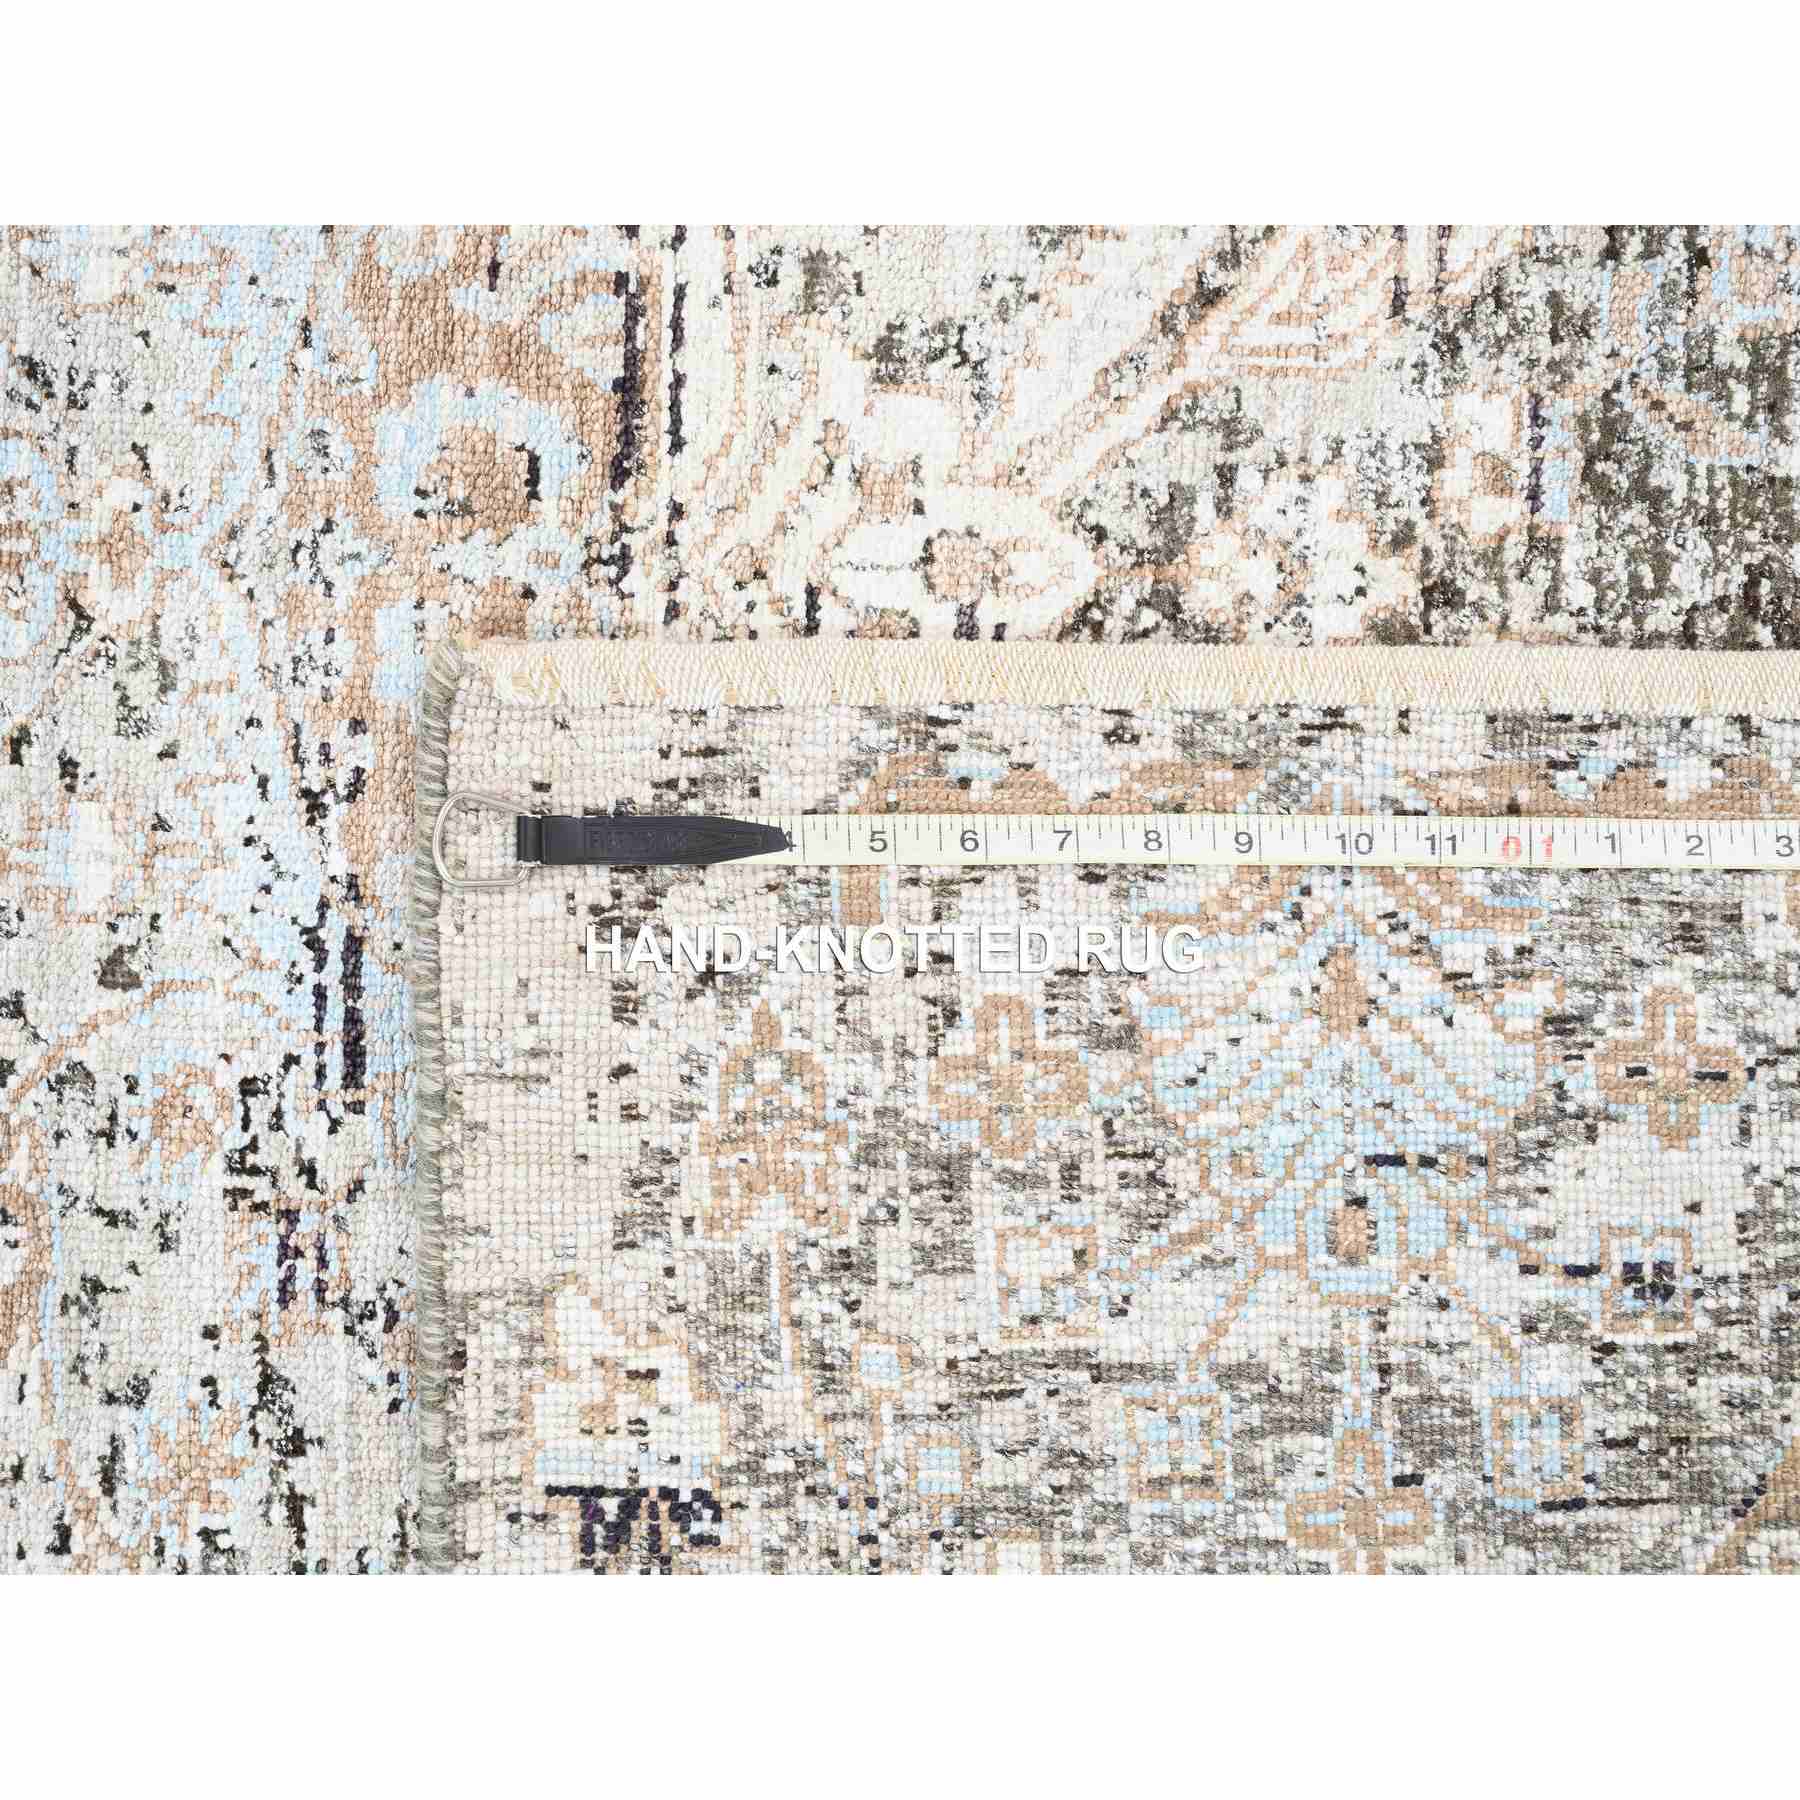 Transitional-Hand-Knotted-Rug-318440